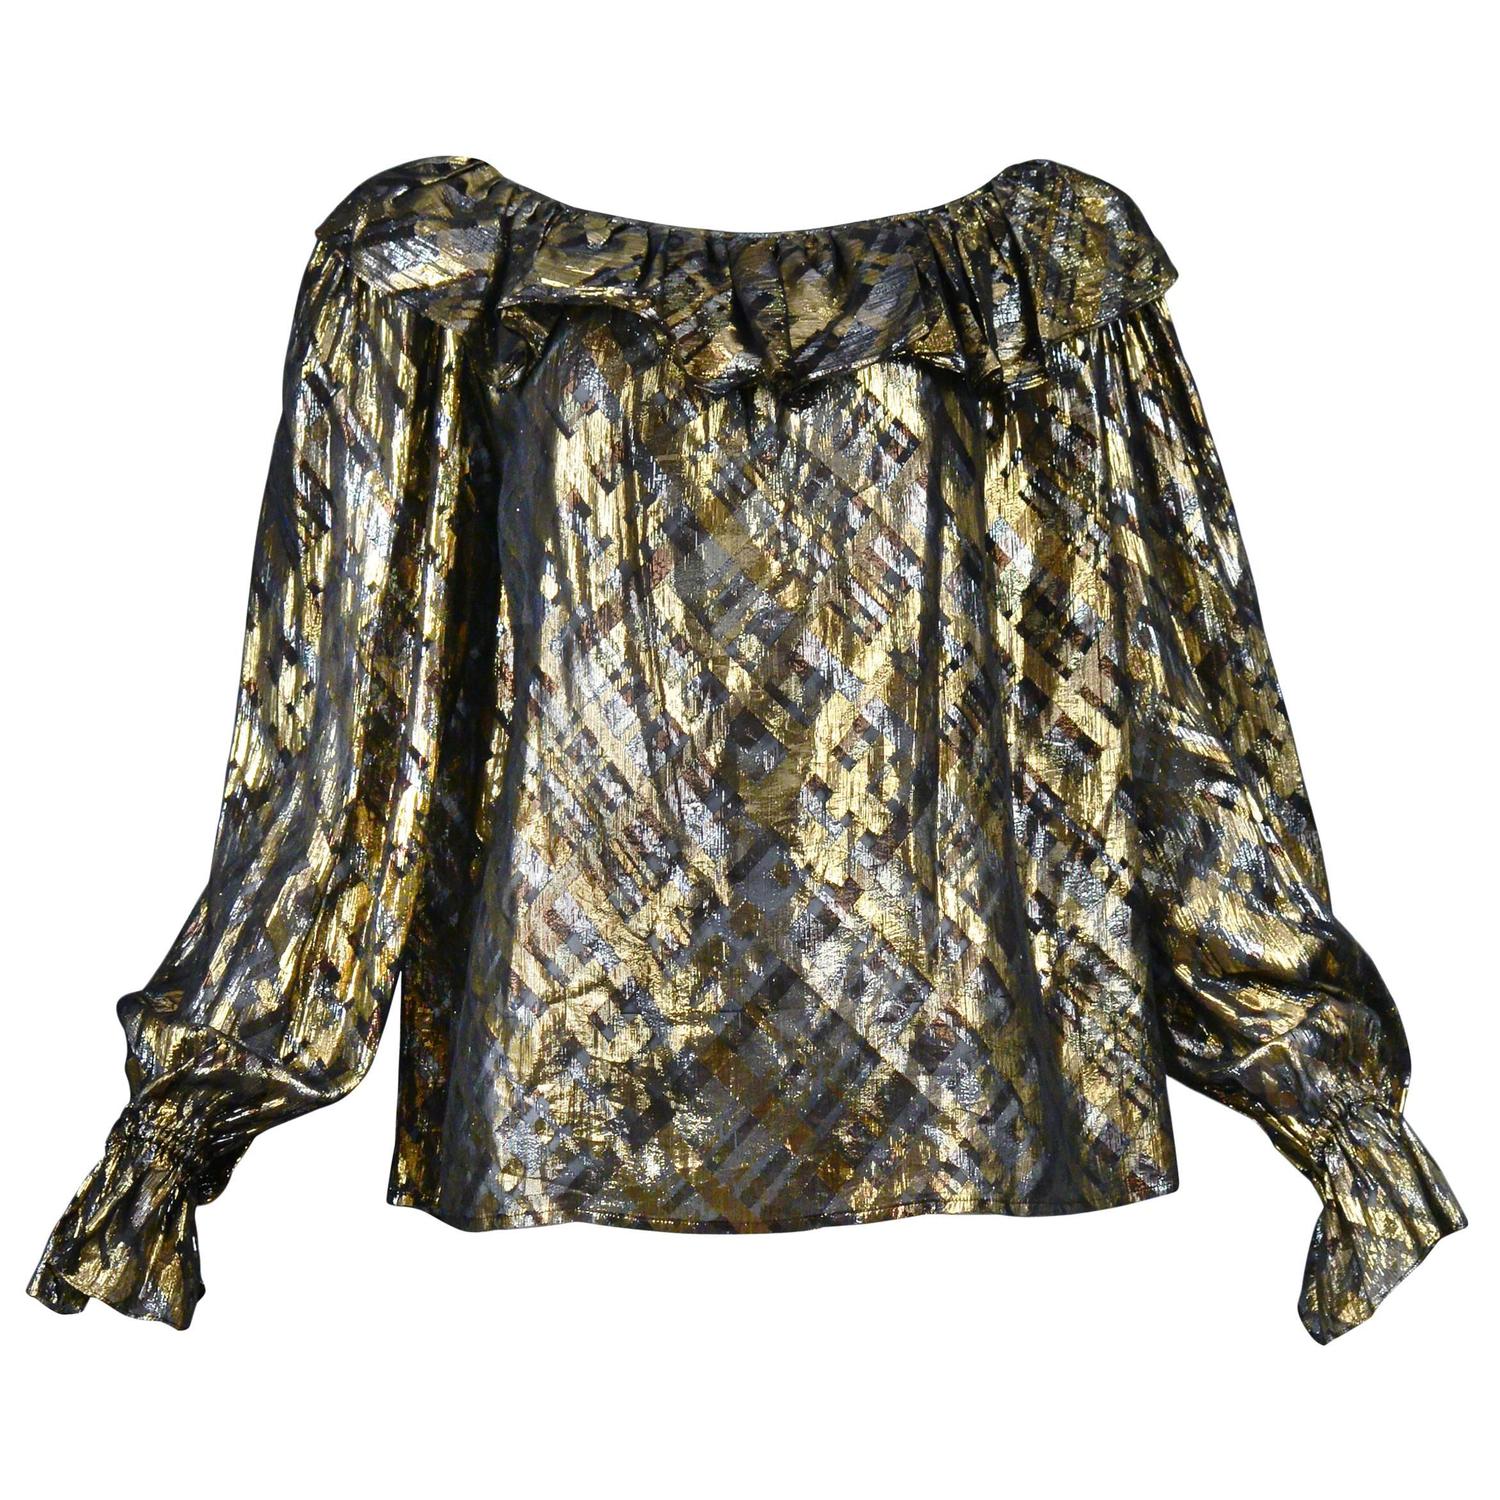 Yves Saint Laurent Gold Lame Plaid Ruffle Blouse For Sale at 1stdibs